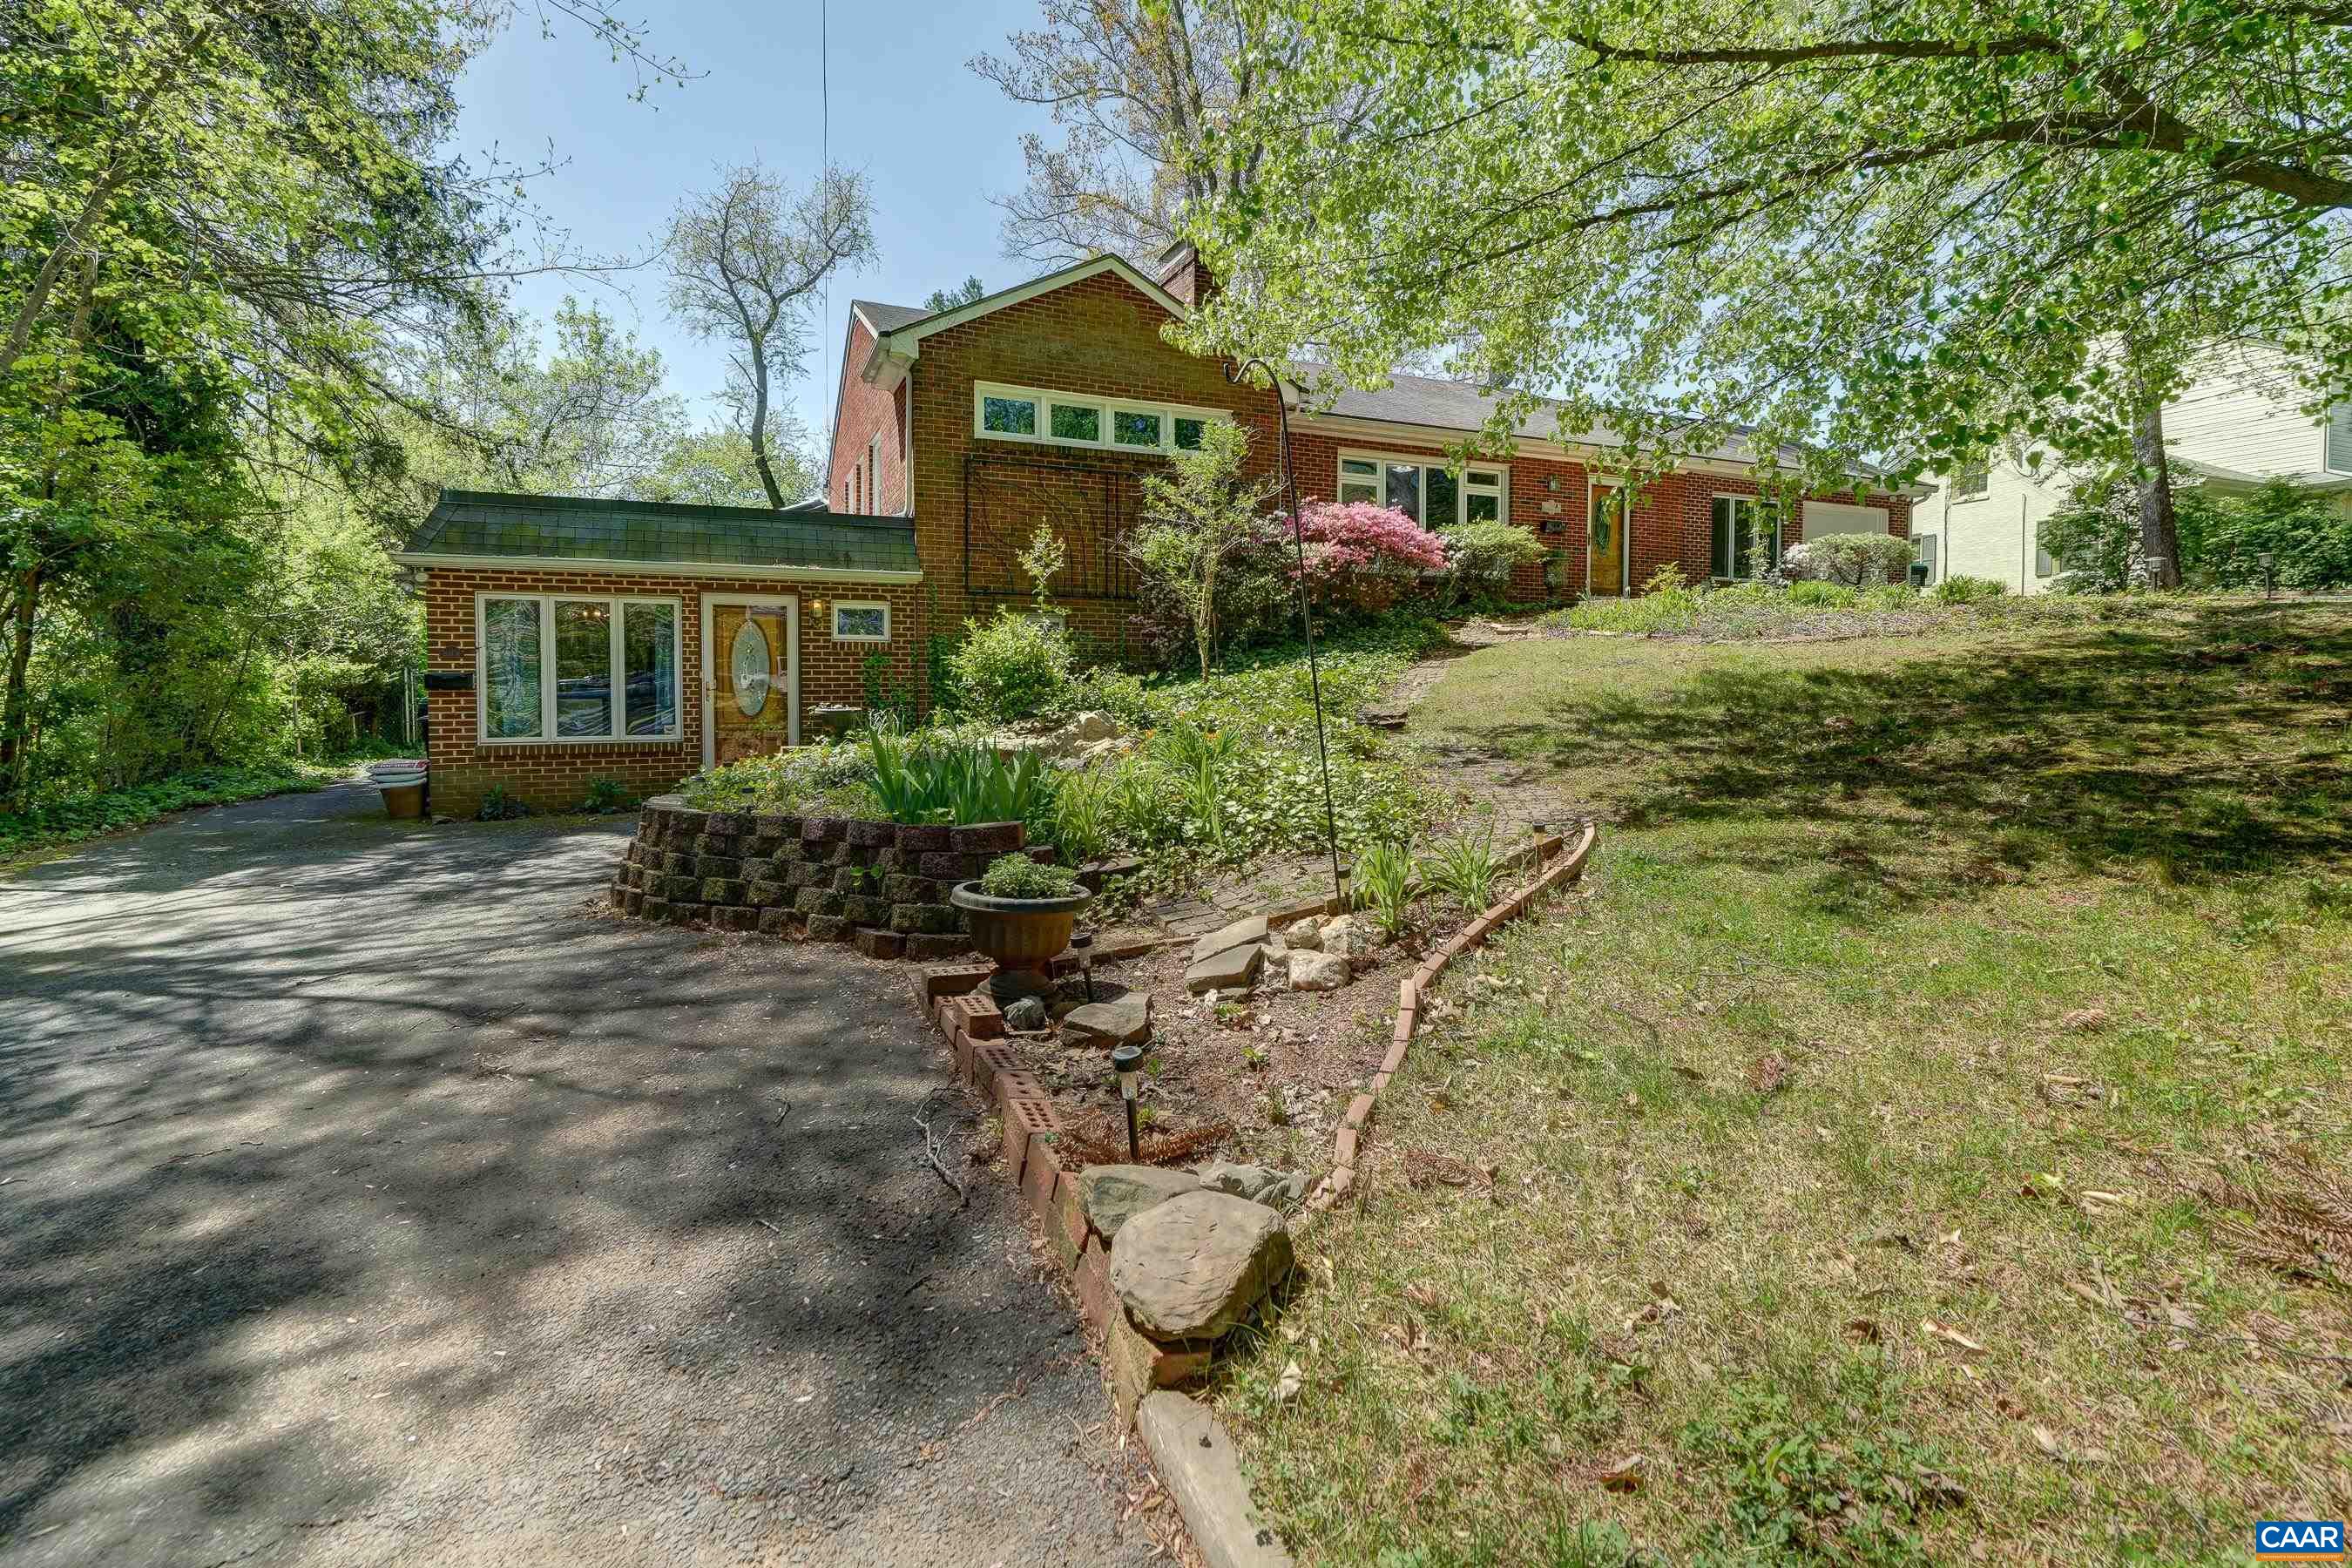 Brick ranch home with basement apartment on a large flat lot in Charlottesville.